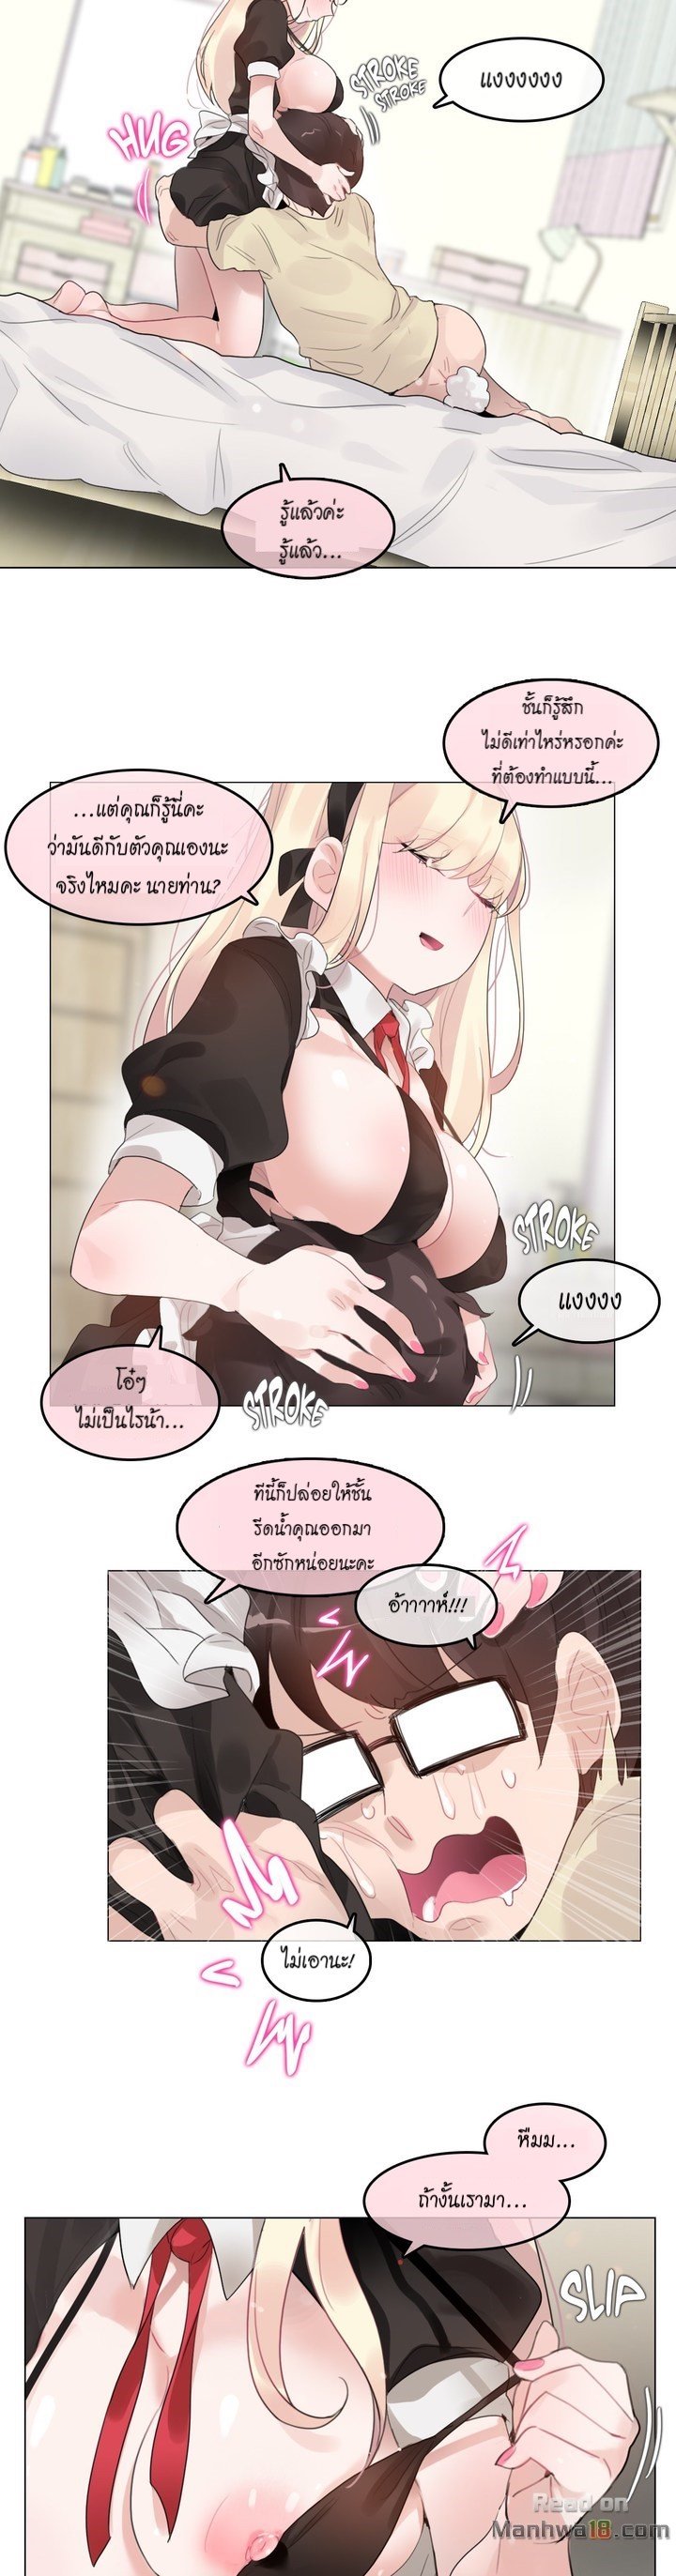 A Pervert’s Daily Life 70 17